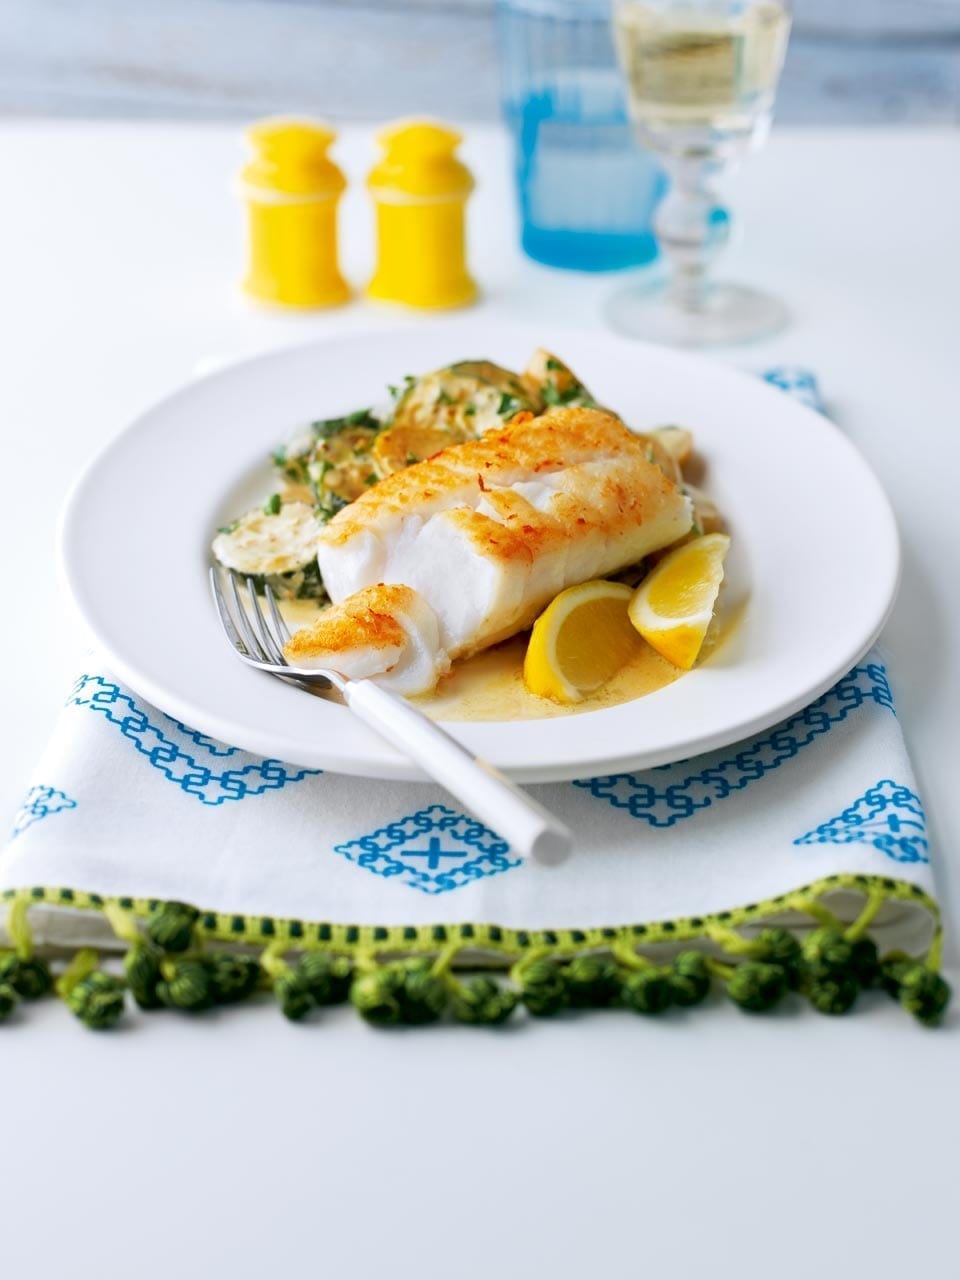 Pan-fried cod with creamy new potatoes and courgettes recipe